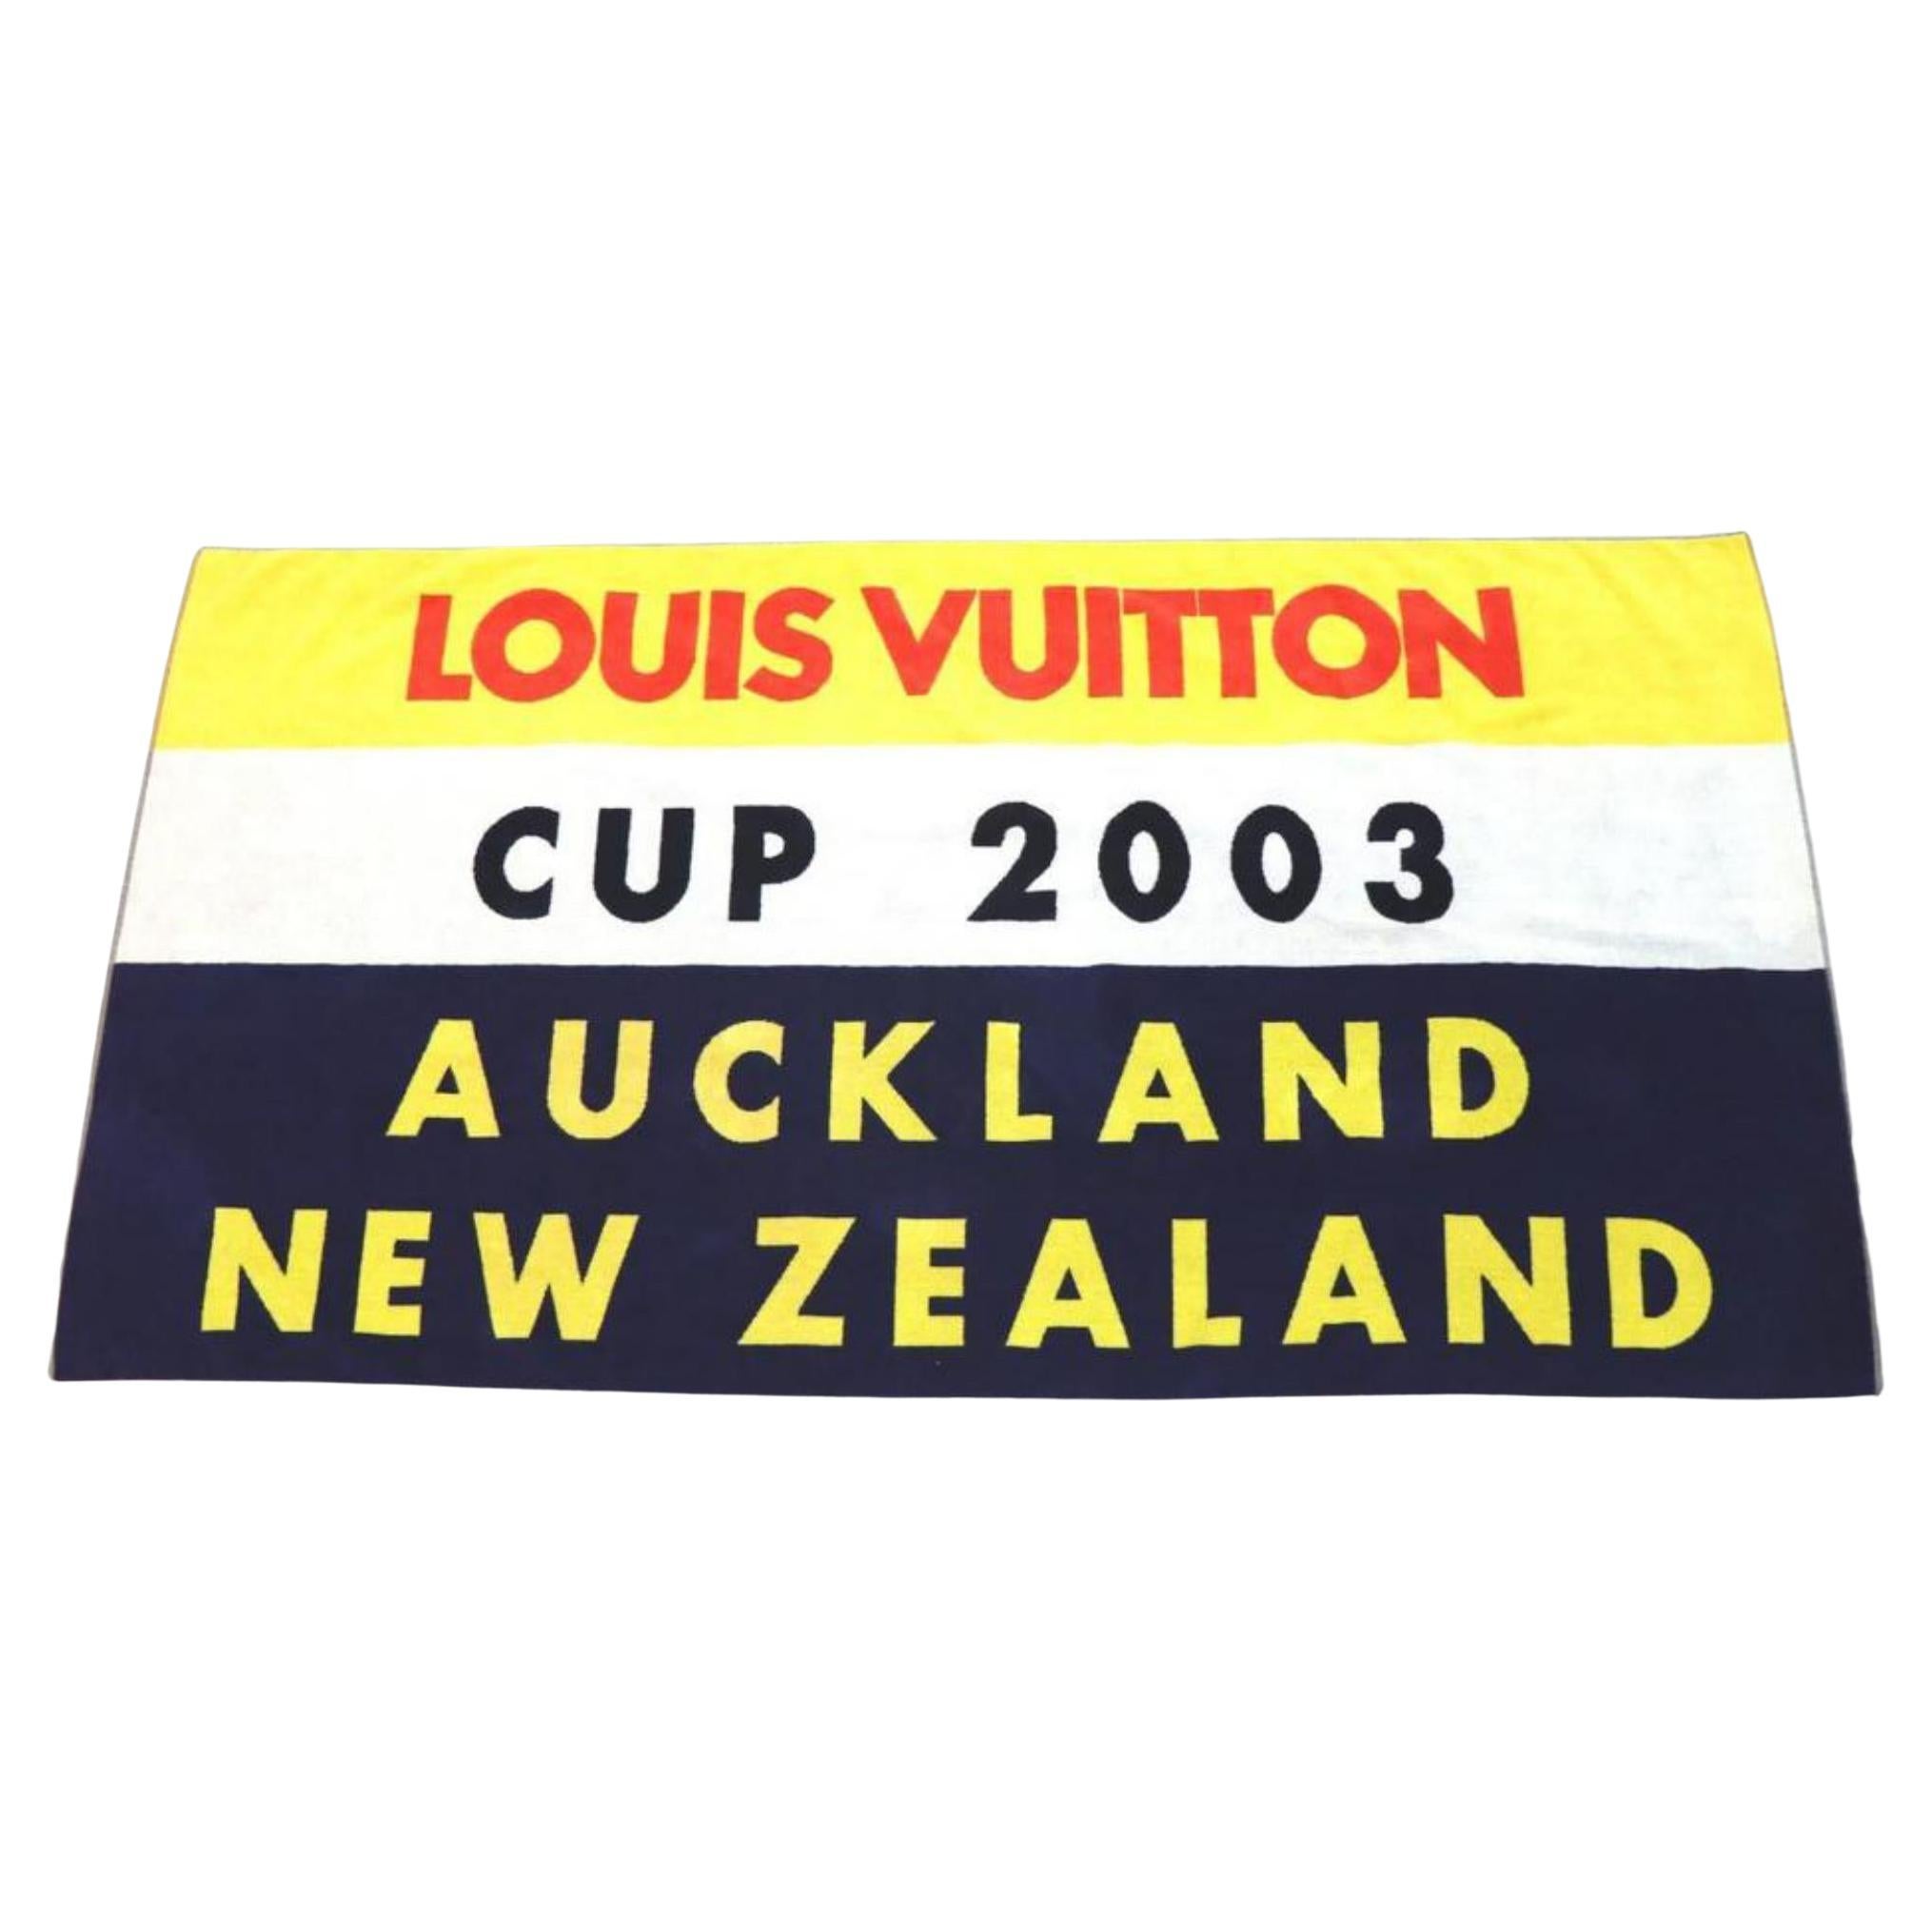 Louis Vuitton Extra Large 2003 LV Cup Auckland Beach Towel 1018lv5 For Sale